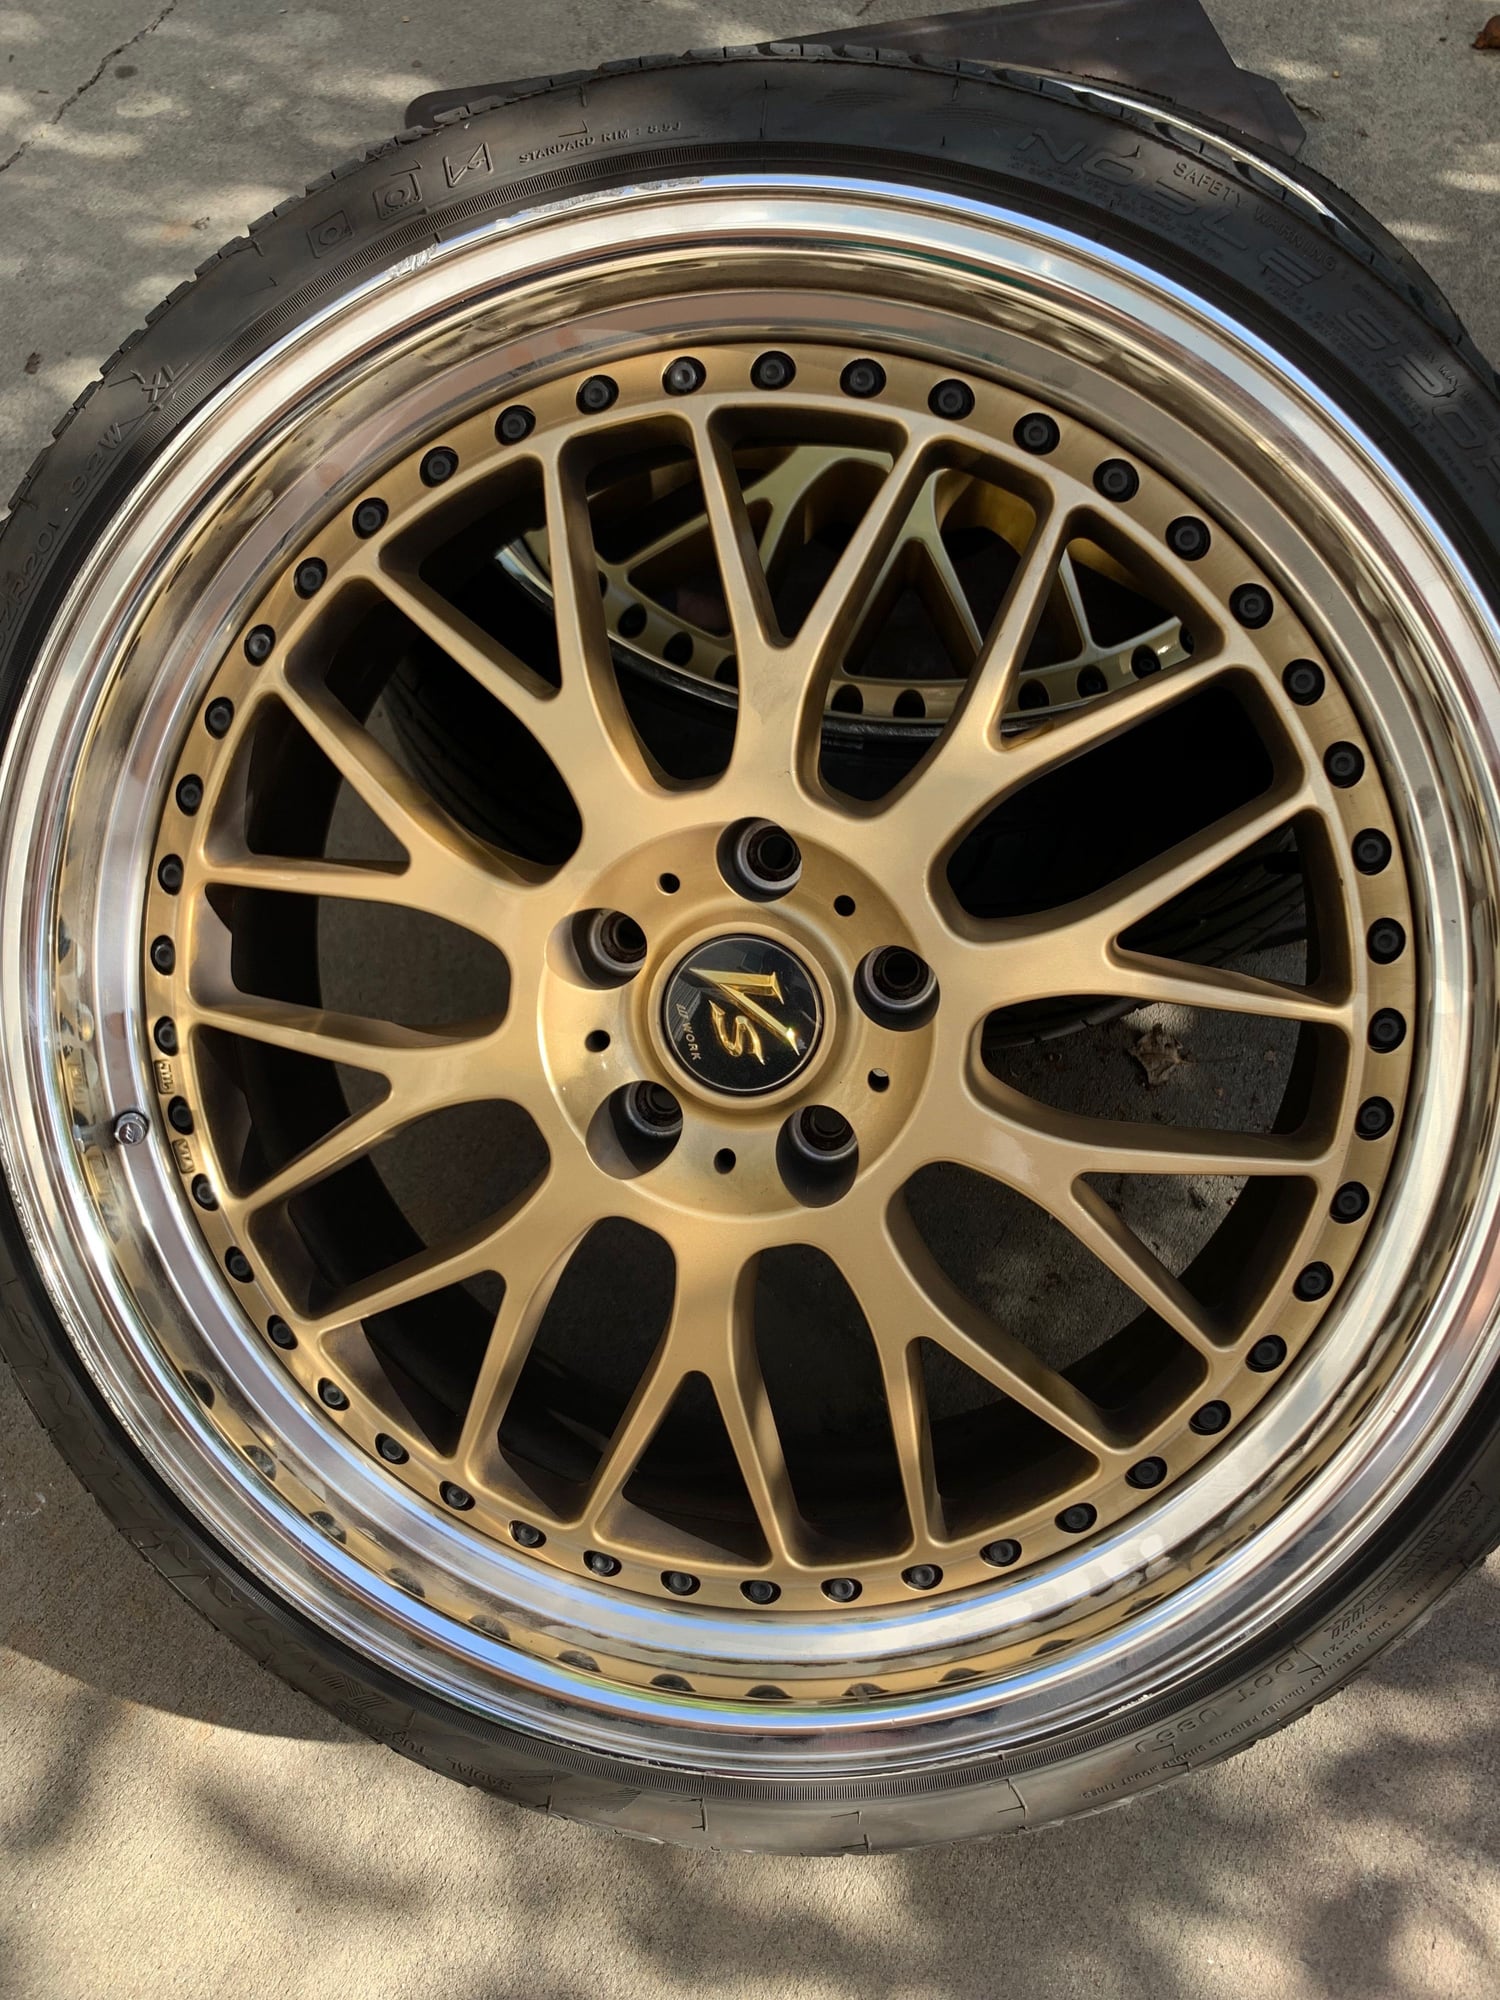 Wheels and Tires/Axles - SOCAL FS: Work VSXX (Gold) 20" Wheels - Used - 2014 to 2019 Lexus GS350 - Pasadena, CA 91010, United States